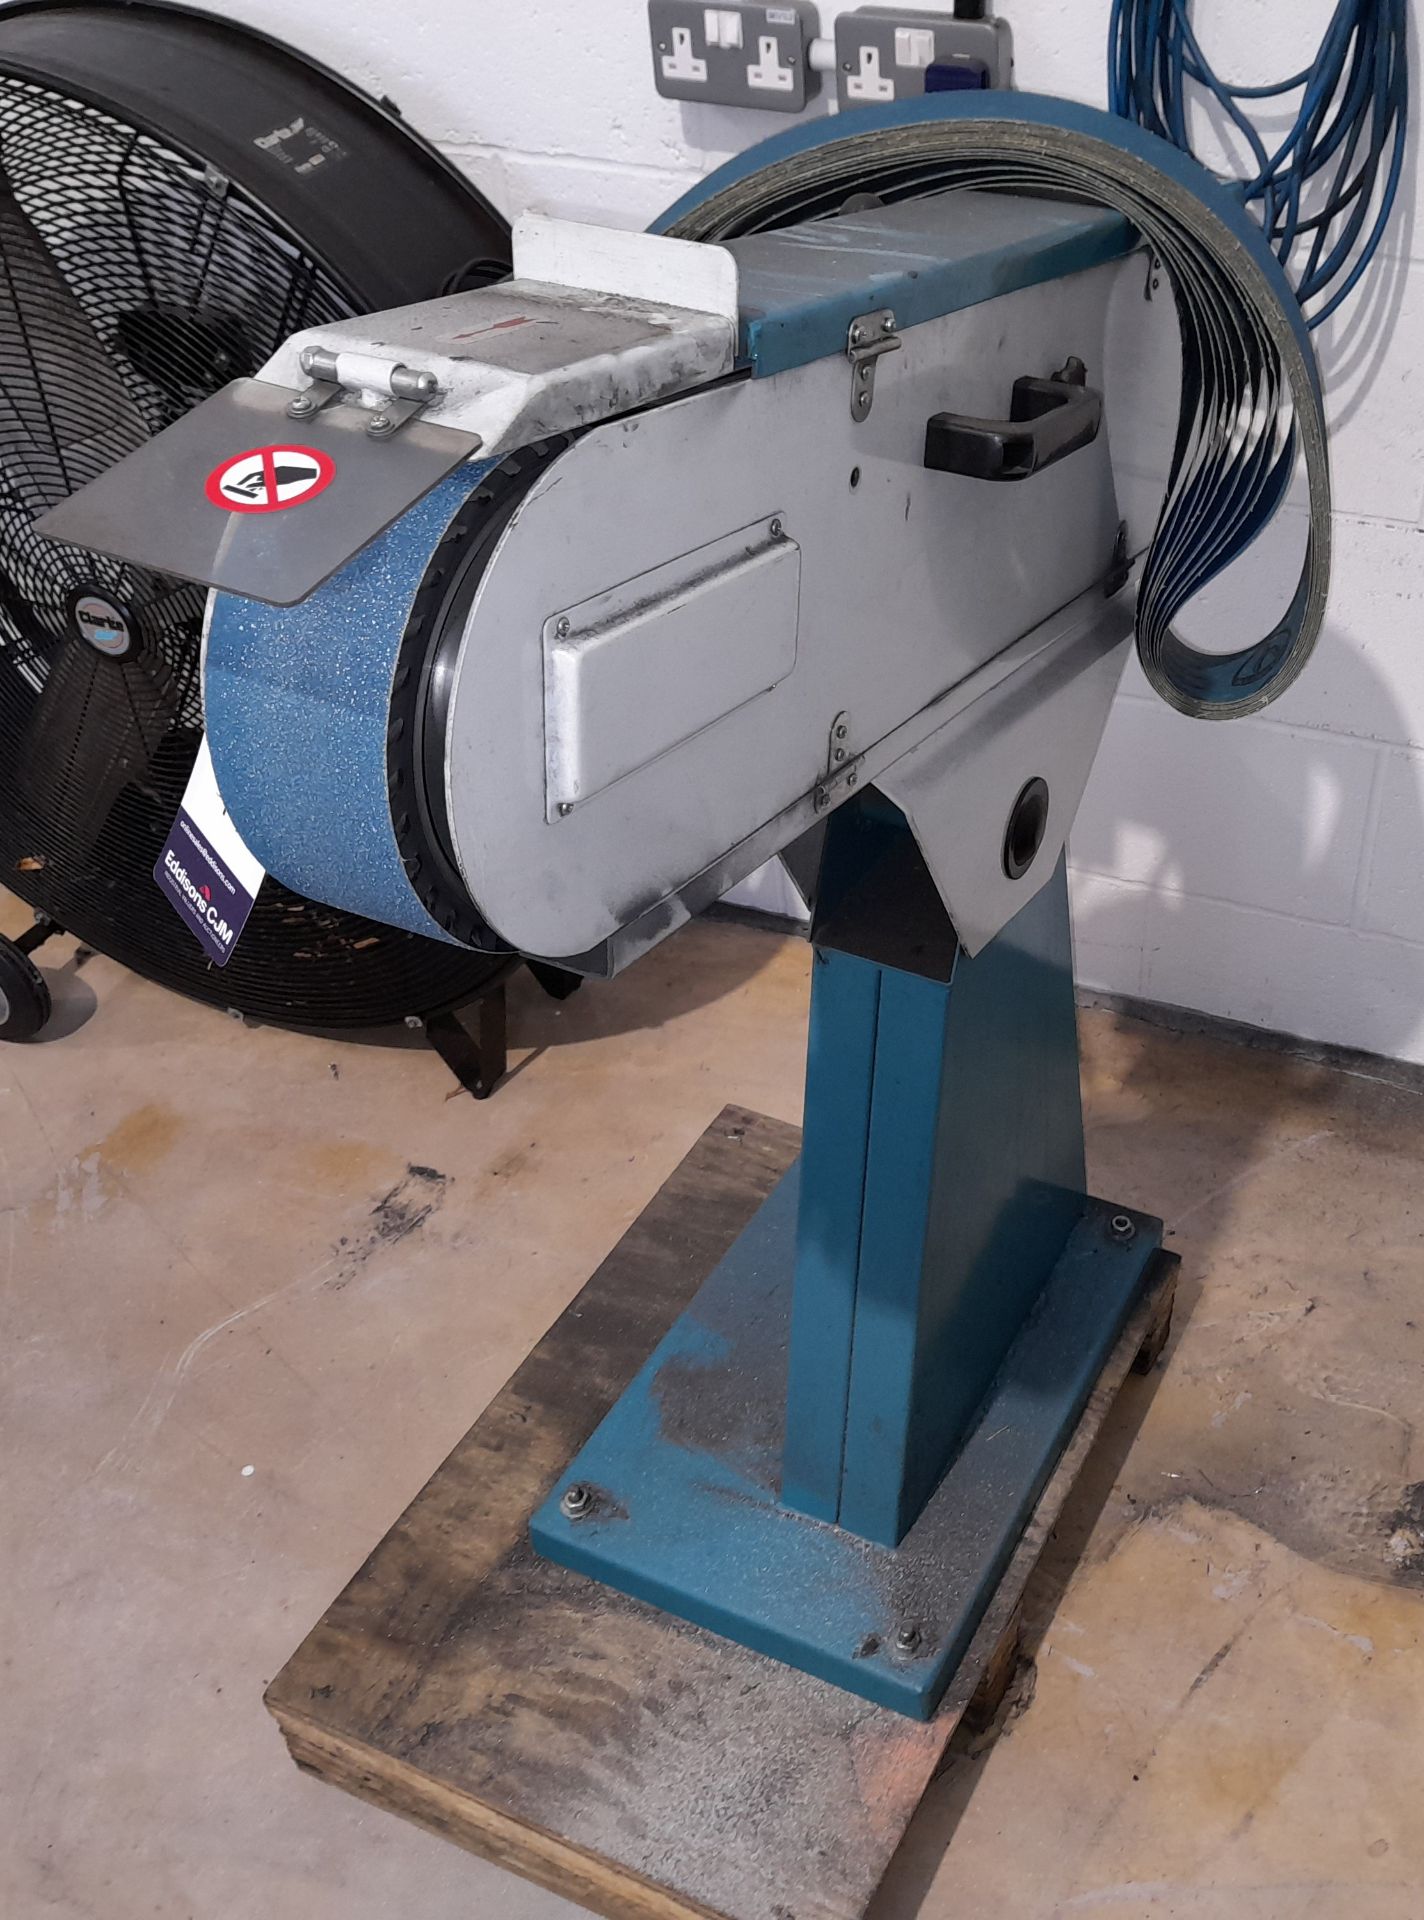 Axminster Engineer Series BS75 x 2000 75mm Belt Linisher, serial number 18AM-010-18-06 - Image 3 of 3